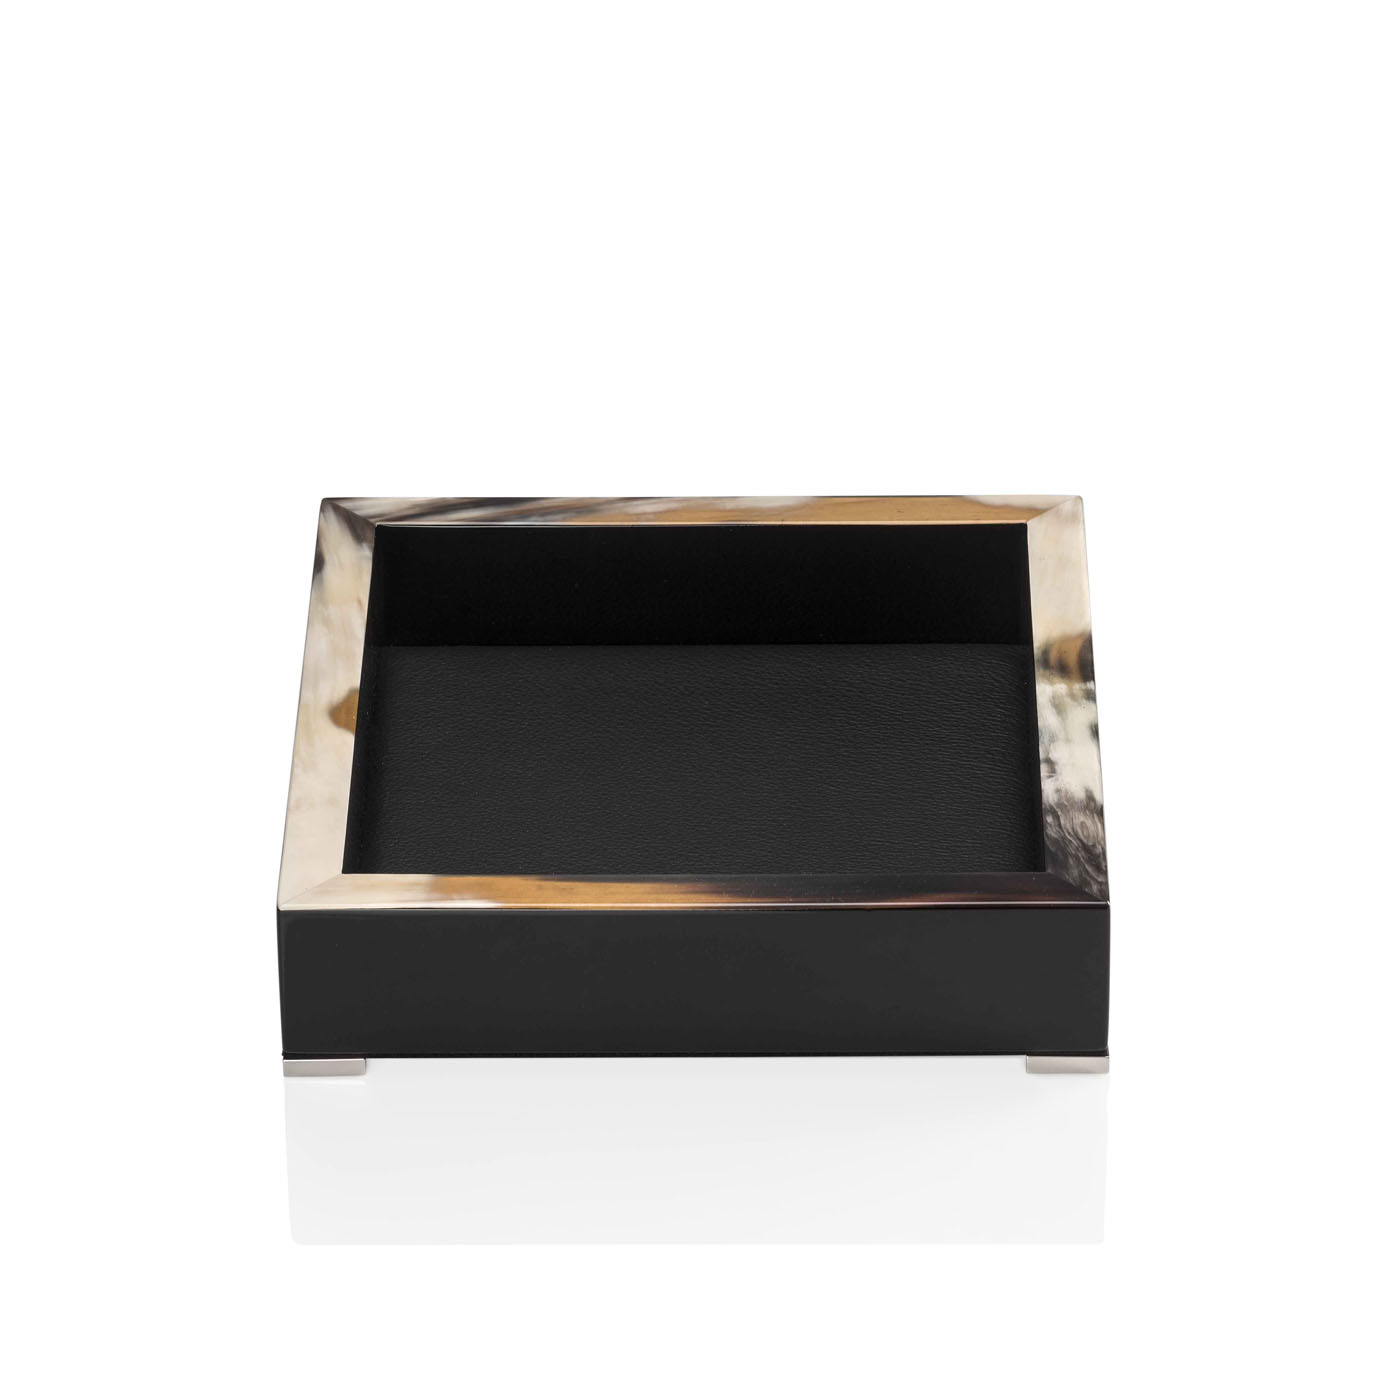 Office sets and smoking accessories - Calipso container in horn, glossy black lacquered wood and black leather - front side - Arcahorn